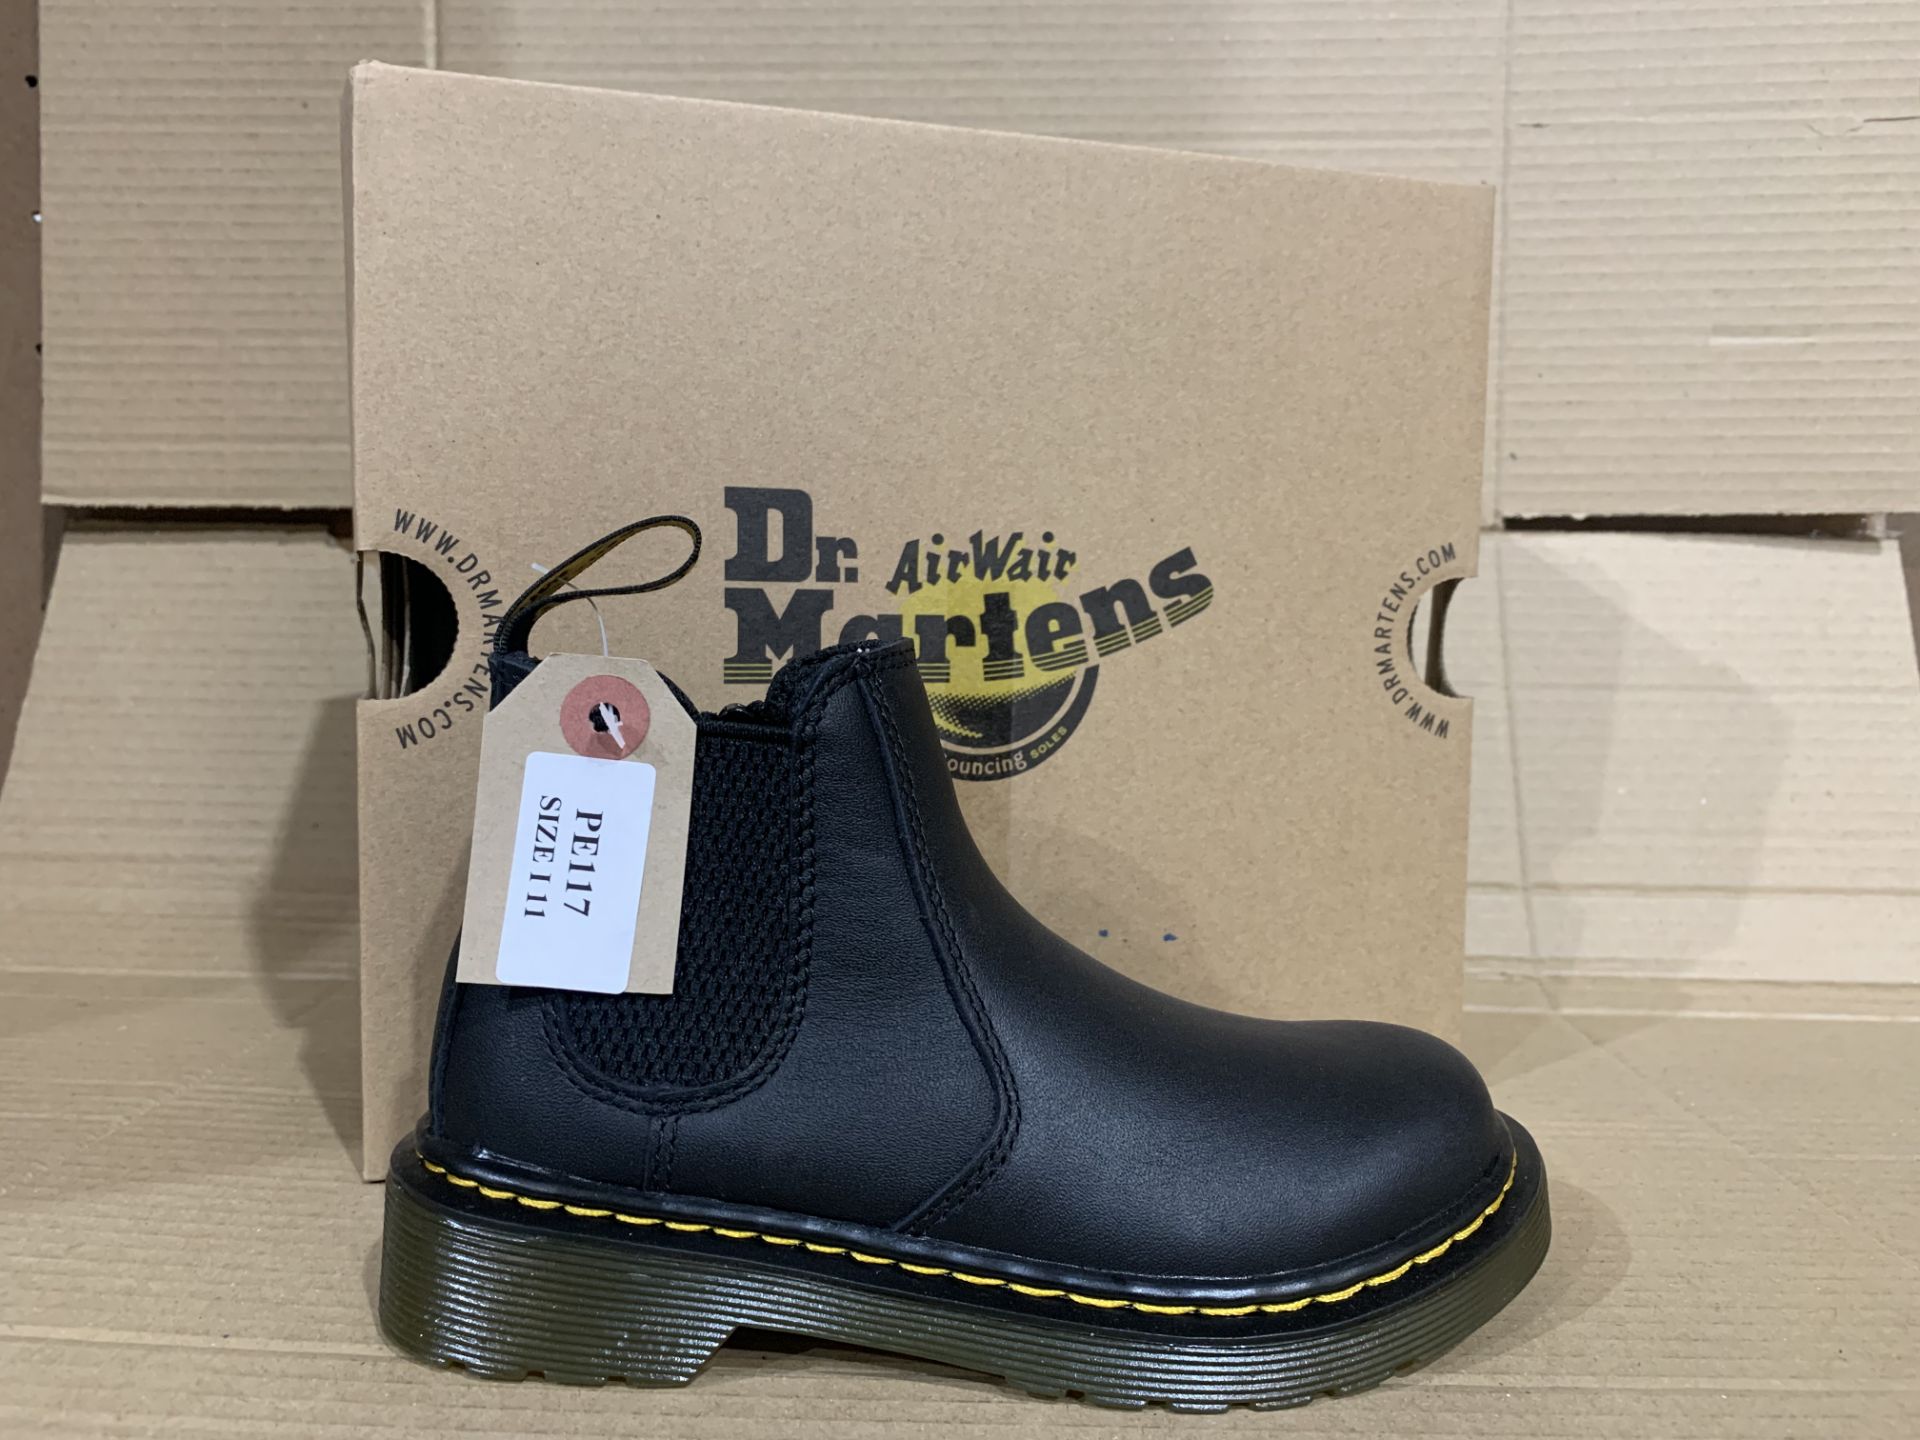 (NO VAT) 2 x NEW BOXED PAIRS OF DR MARTENS AIRWAIR SOFTY T BOOTS. SIZE INFANT 11